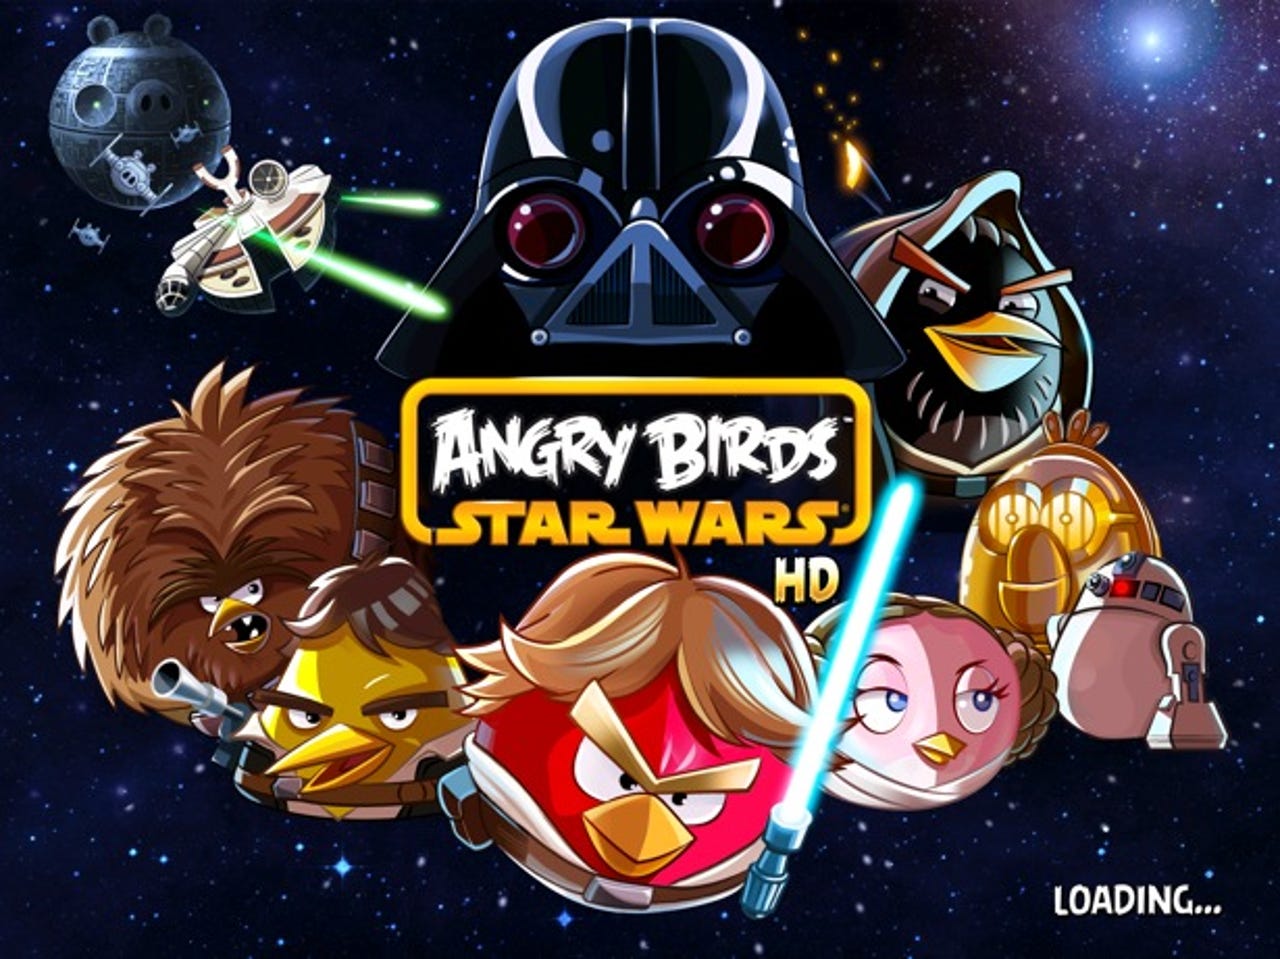 Angry Birds now available for Windows PCs, no browser needed - Apps